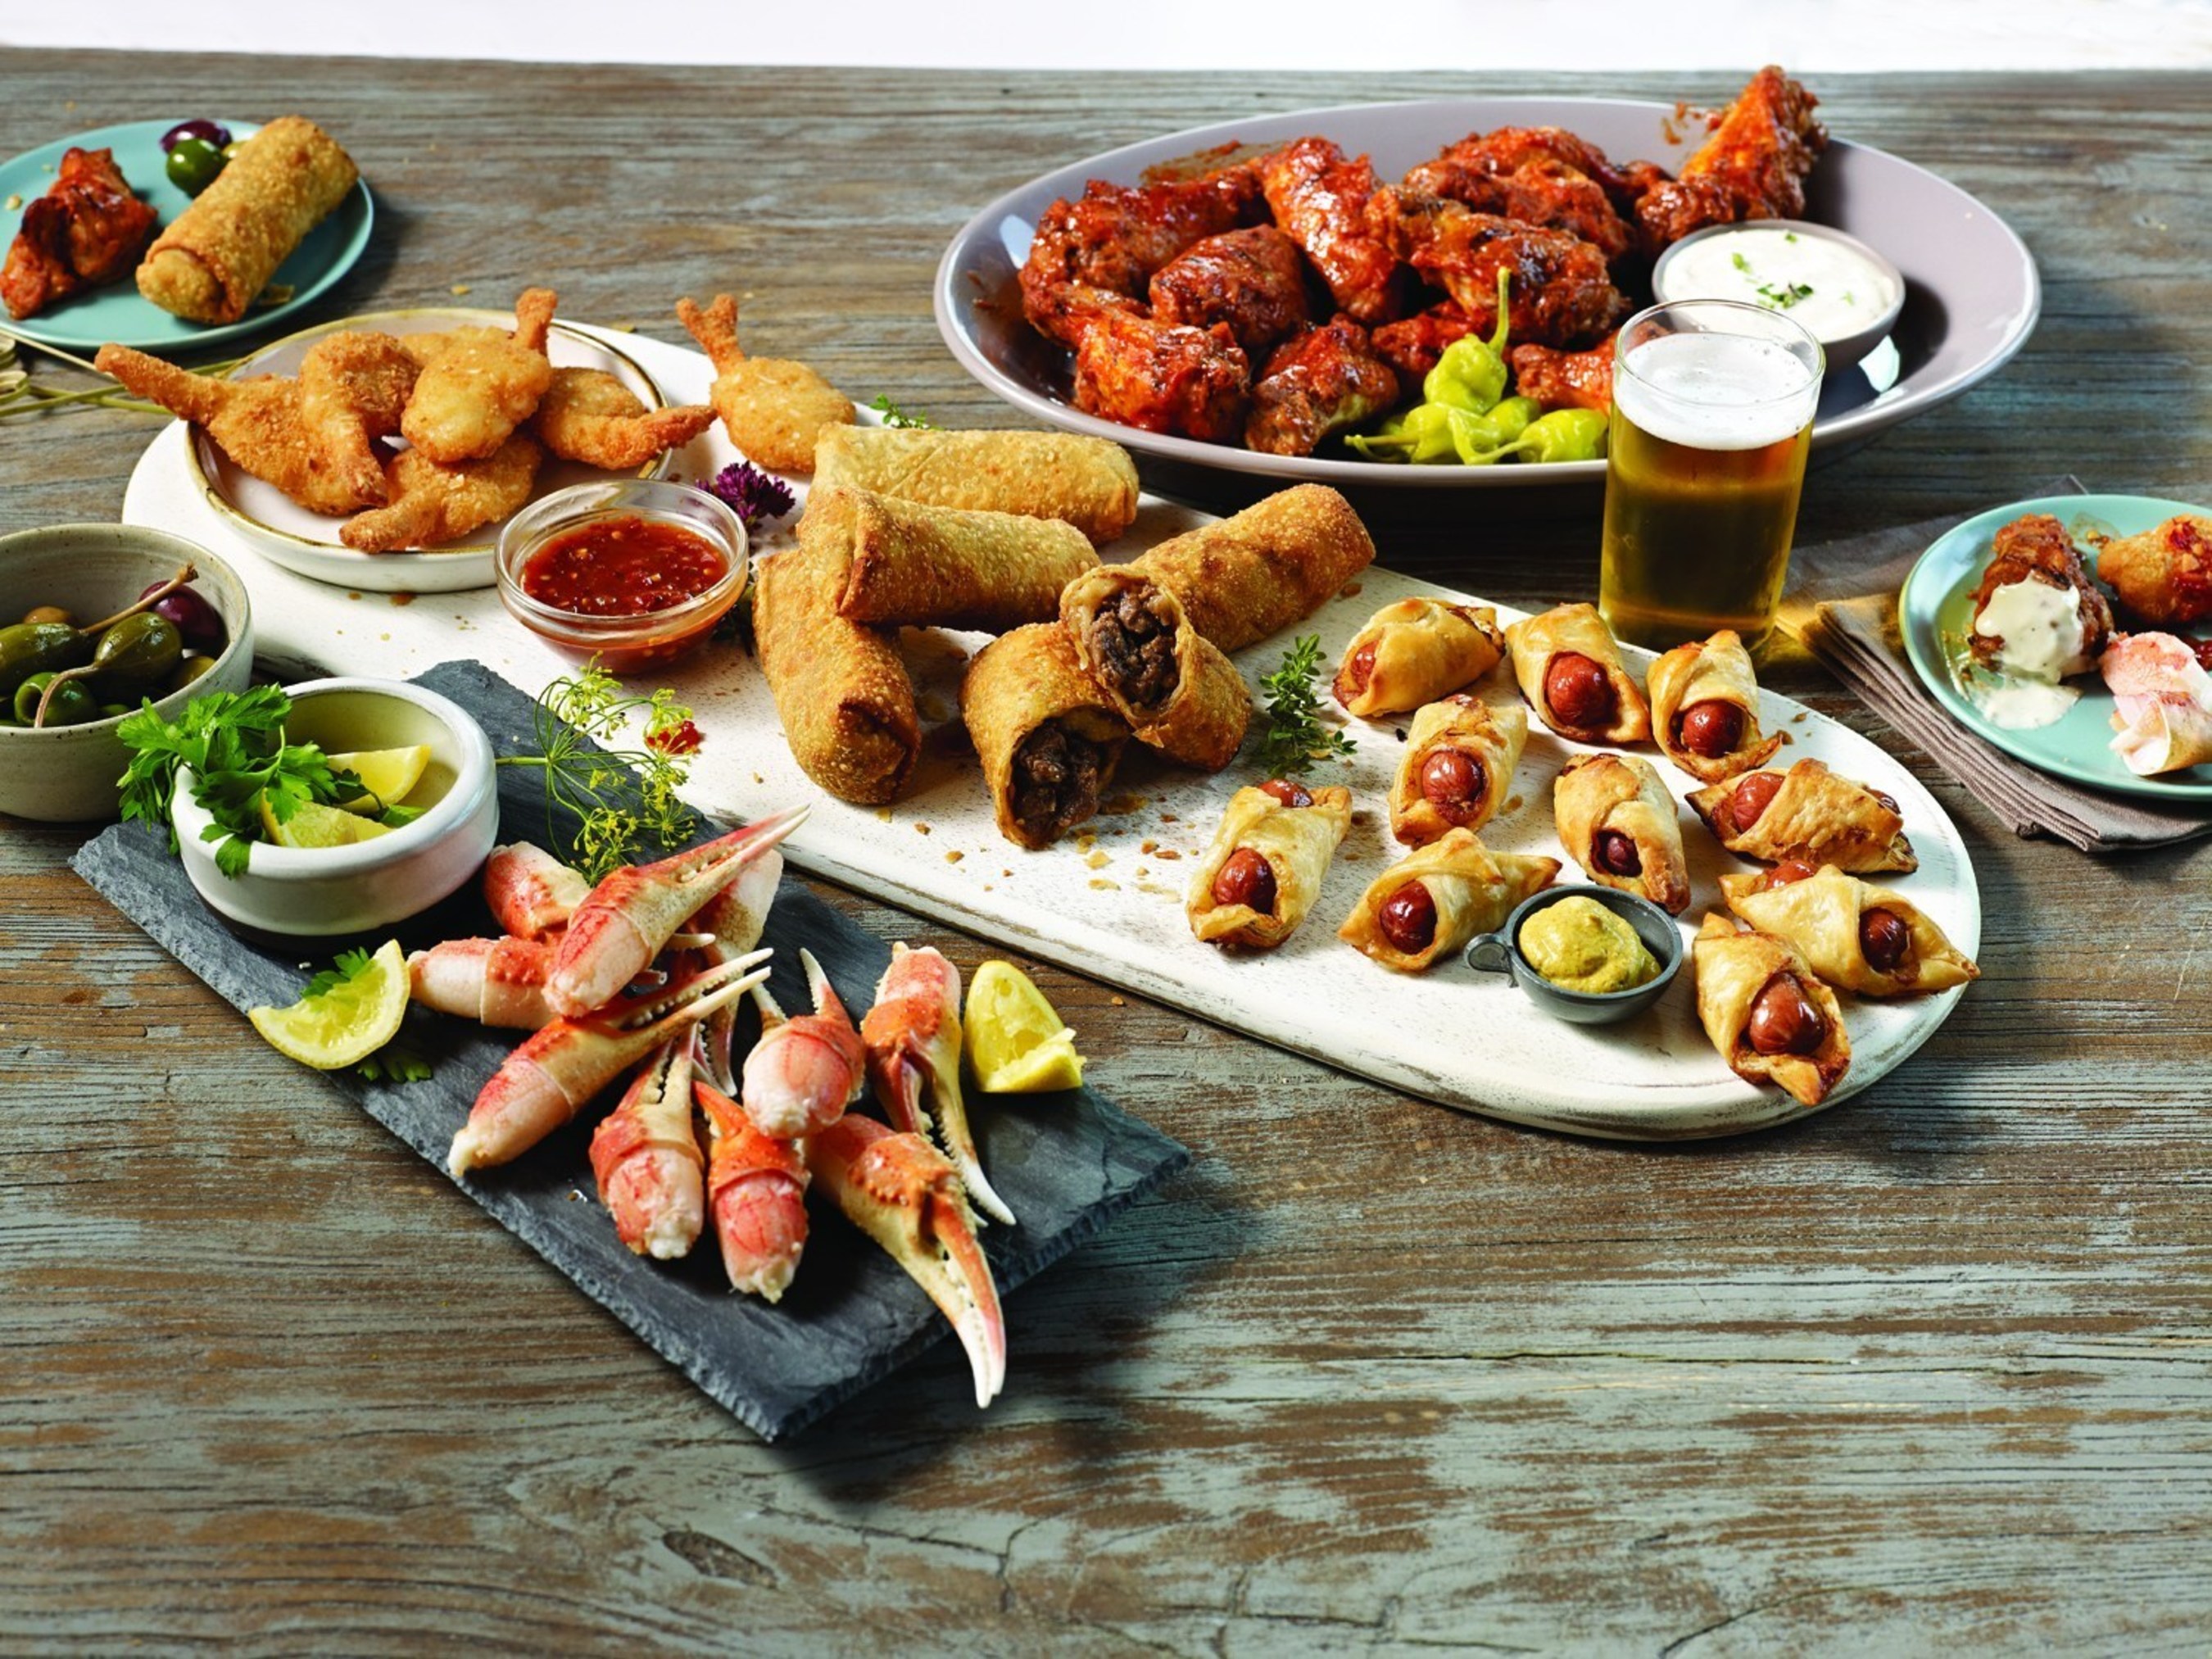 These apps from Omaha Steaks are so good, some folks might not even remember the game! This collection of gourmet favorites includes some of our finest World Port Seafood - sweet, crispy Coconut Shrimp and rich cracked Snow Crab Claws - along with plenty of our perfect Buffalo Wings and world-famous Franks in a Blanket. And, try this - the incredible, cross-cultural flavor of Omaha Steaks Filet Mignon Spring Rolls. What game?